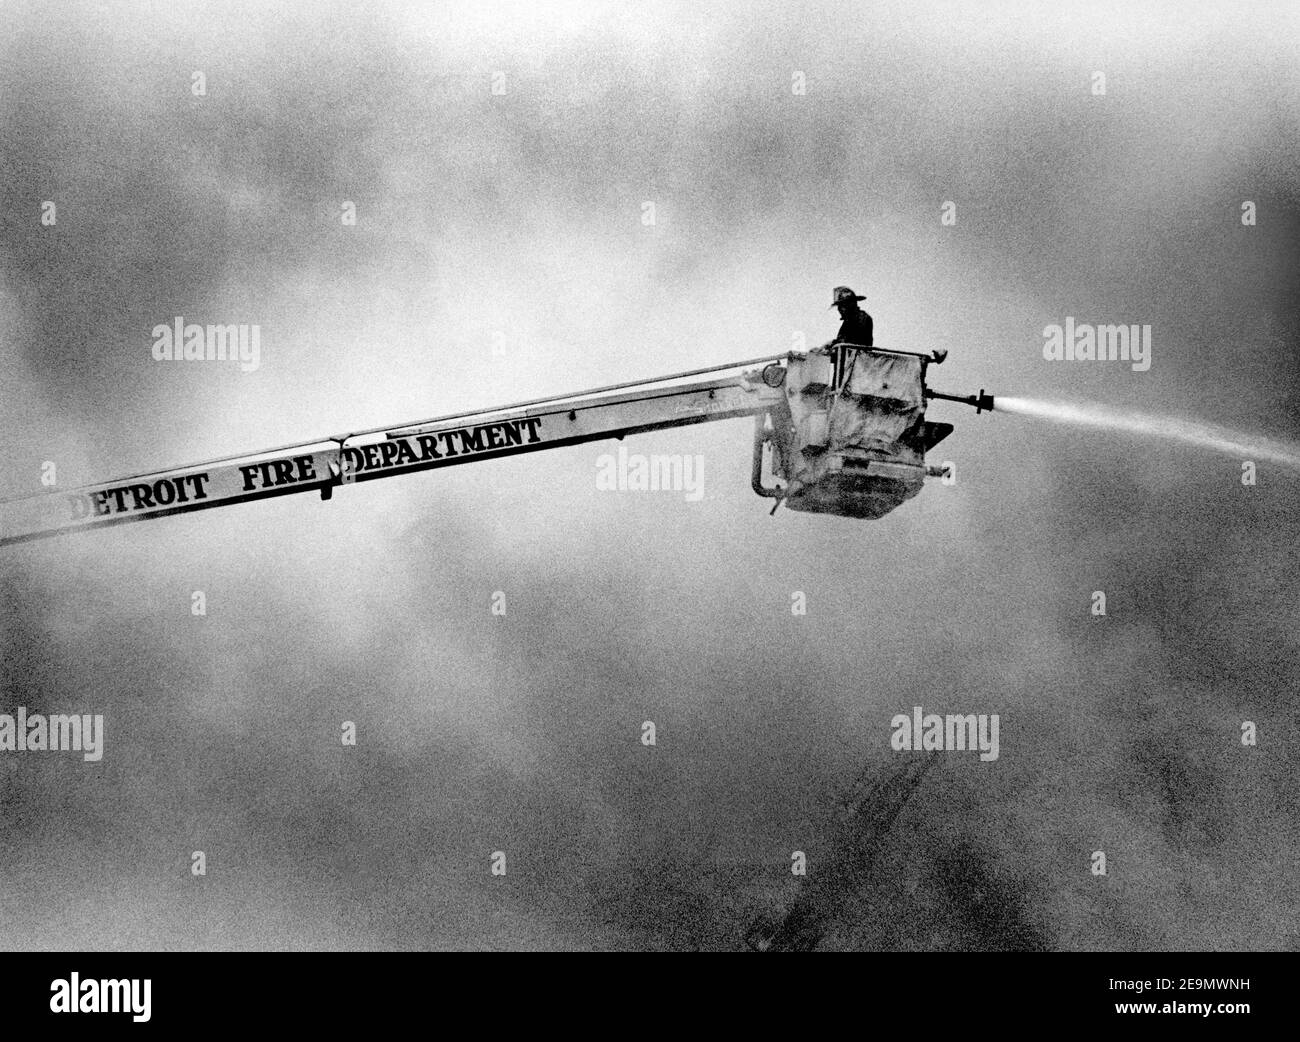 Black & white image of firefighter directing water on fire from hydraulic aerial platform on Detroit Fire Department truck Stock Photo